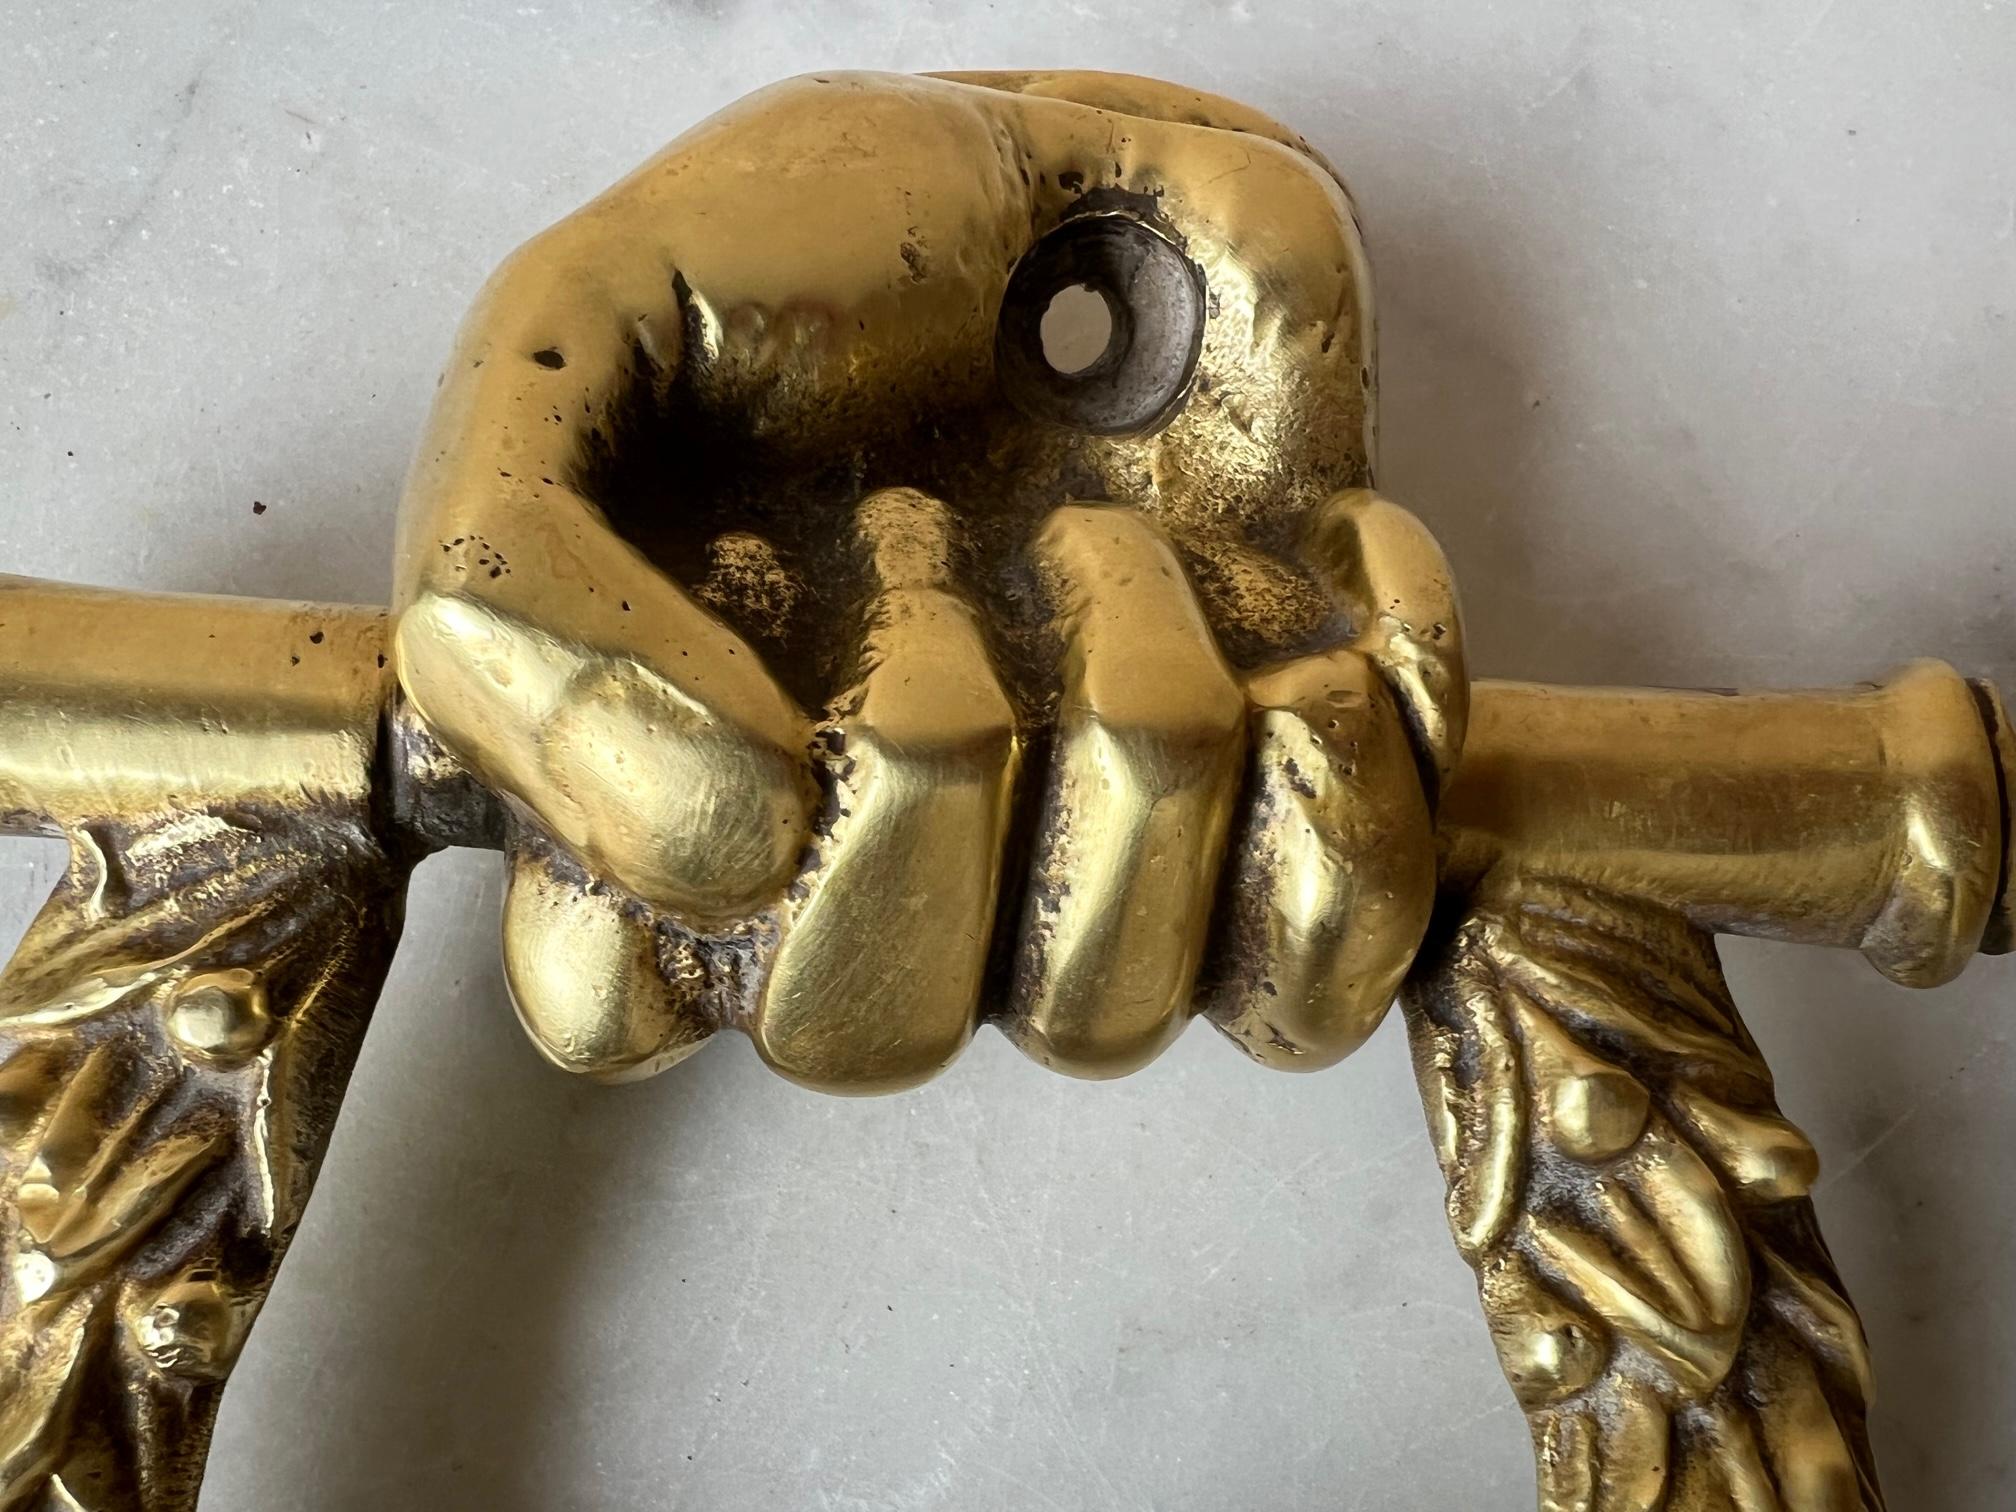 19th century brass door knocker in the form of a hand holding a laurel wreath and a lions head.